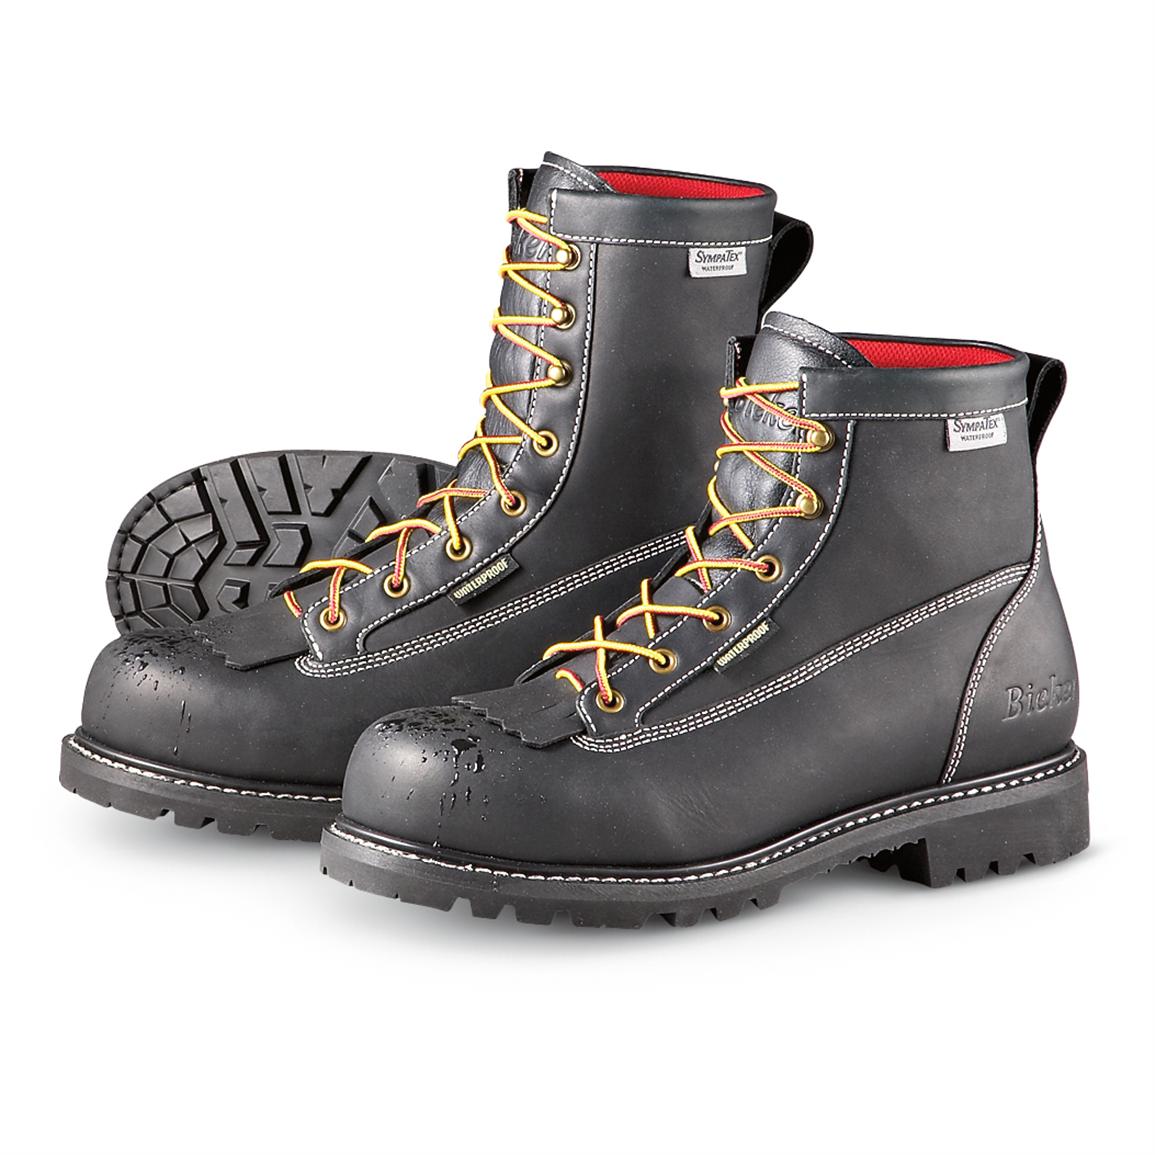 Buy > masters work boots > in stock